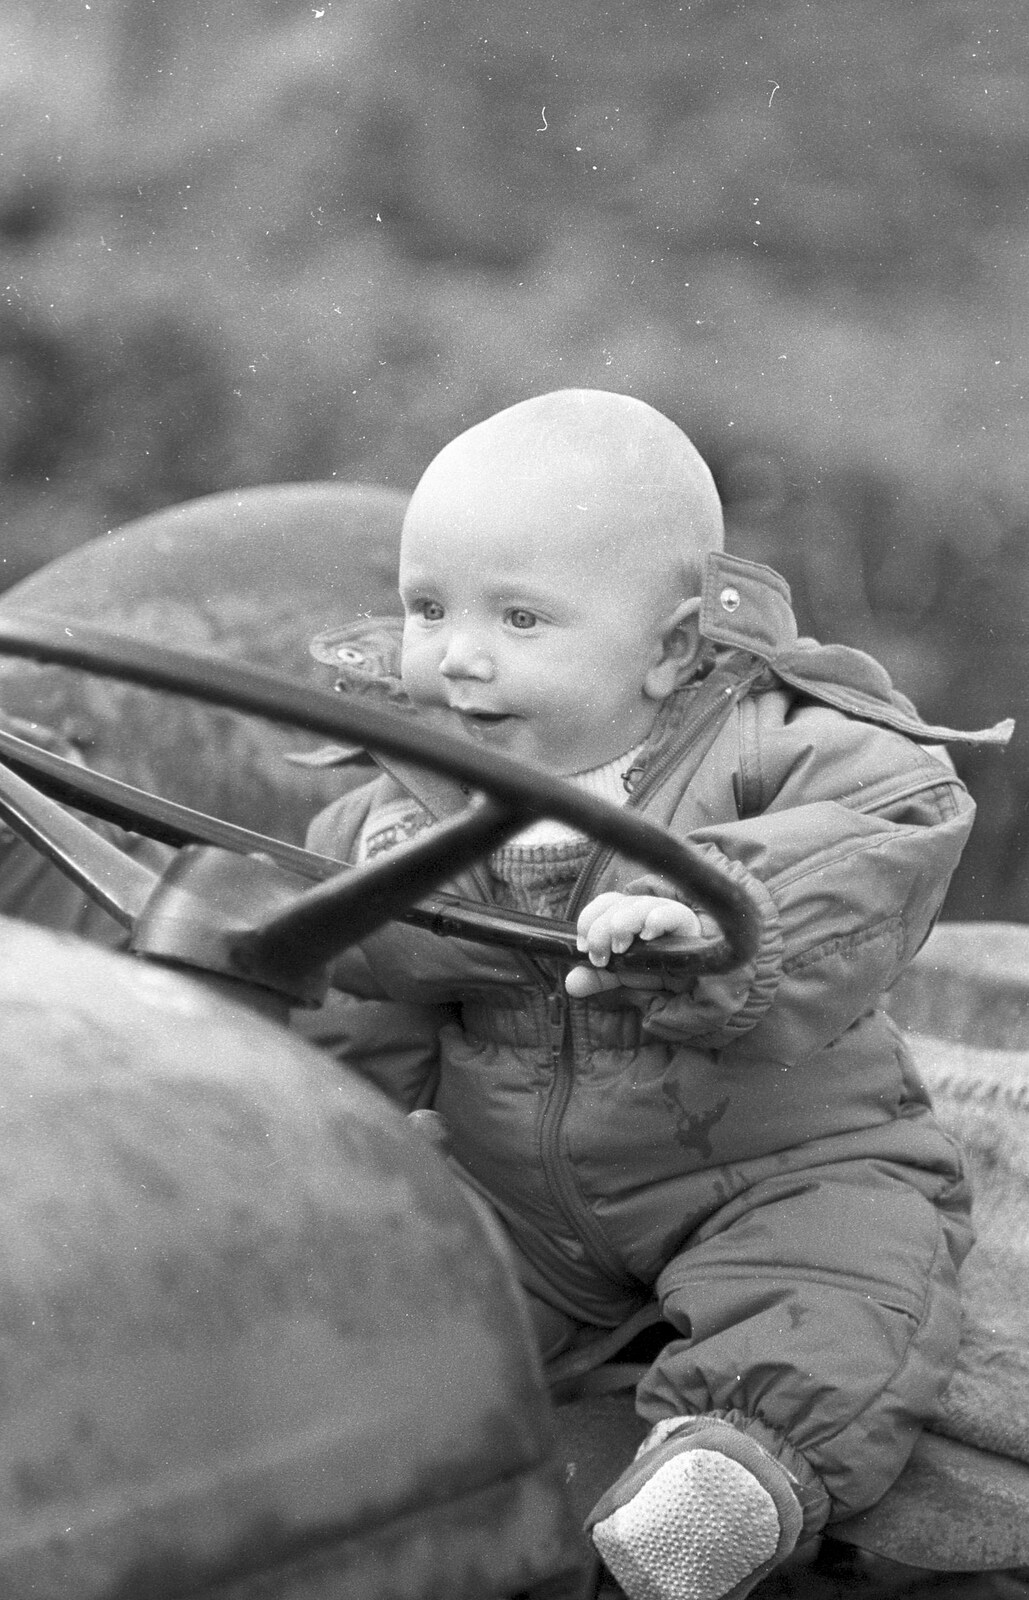 Monique's baby pretends to drive from Cider Making in Black and White, Stuston, Suffolk - 11th October 1992